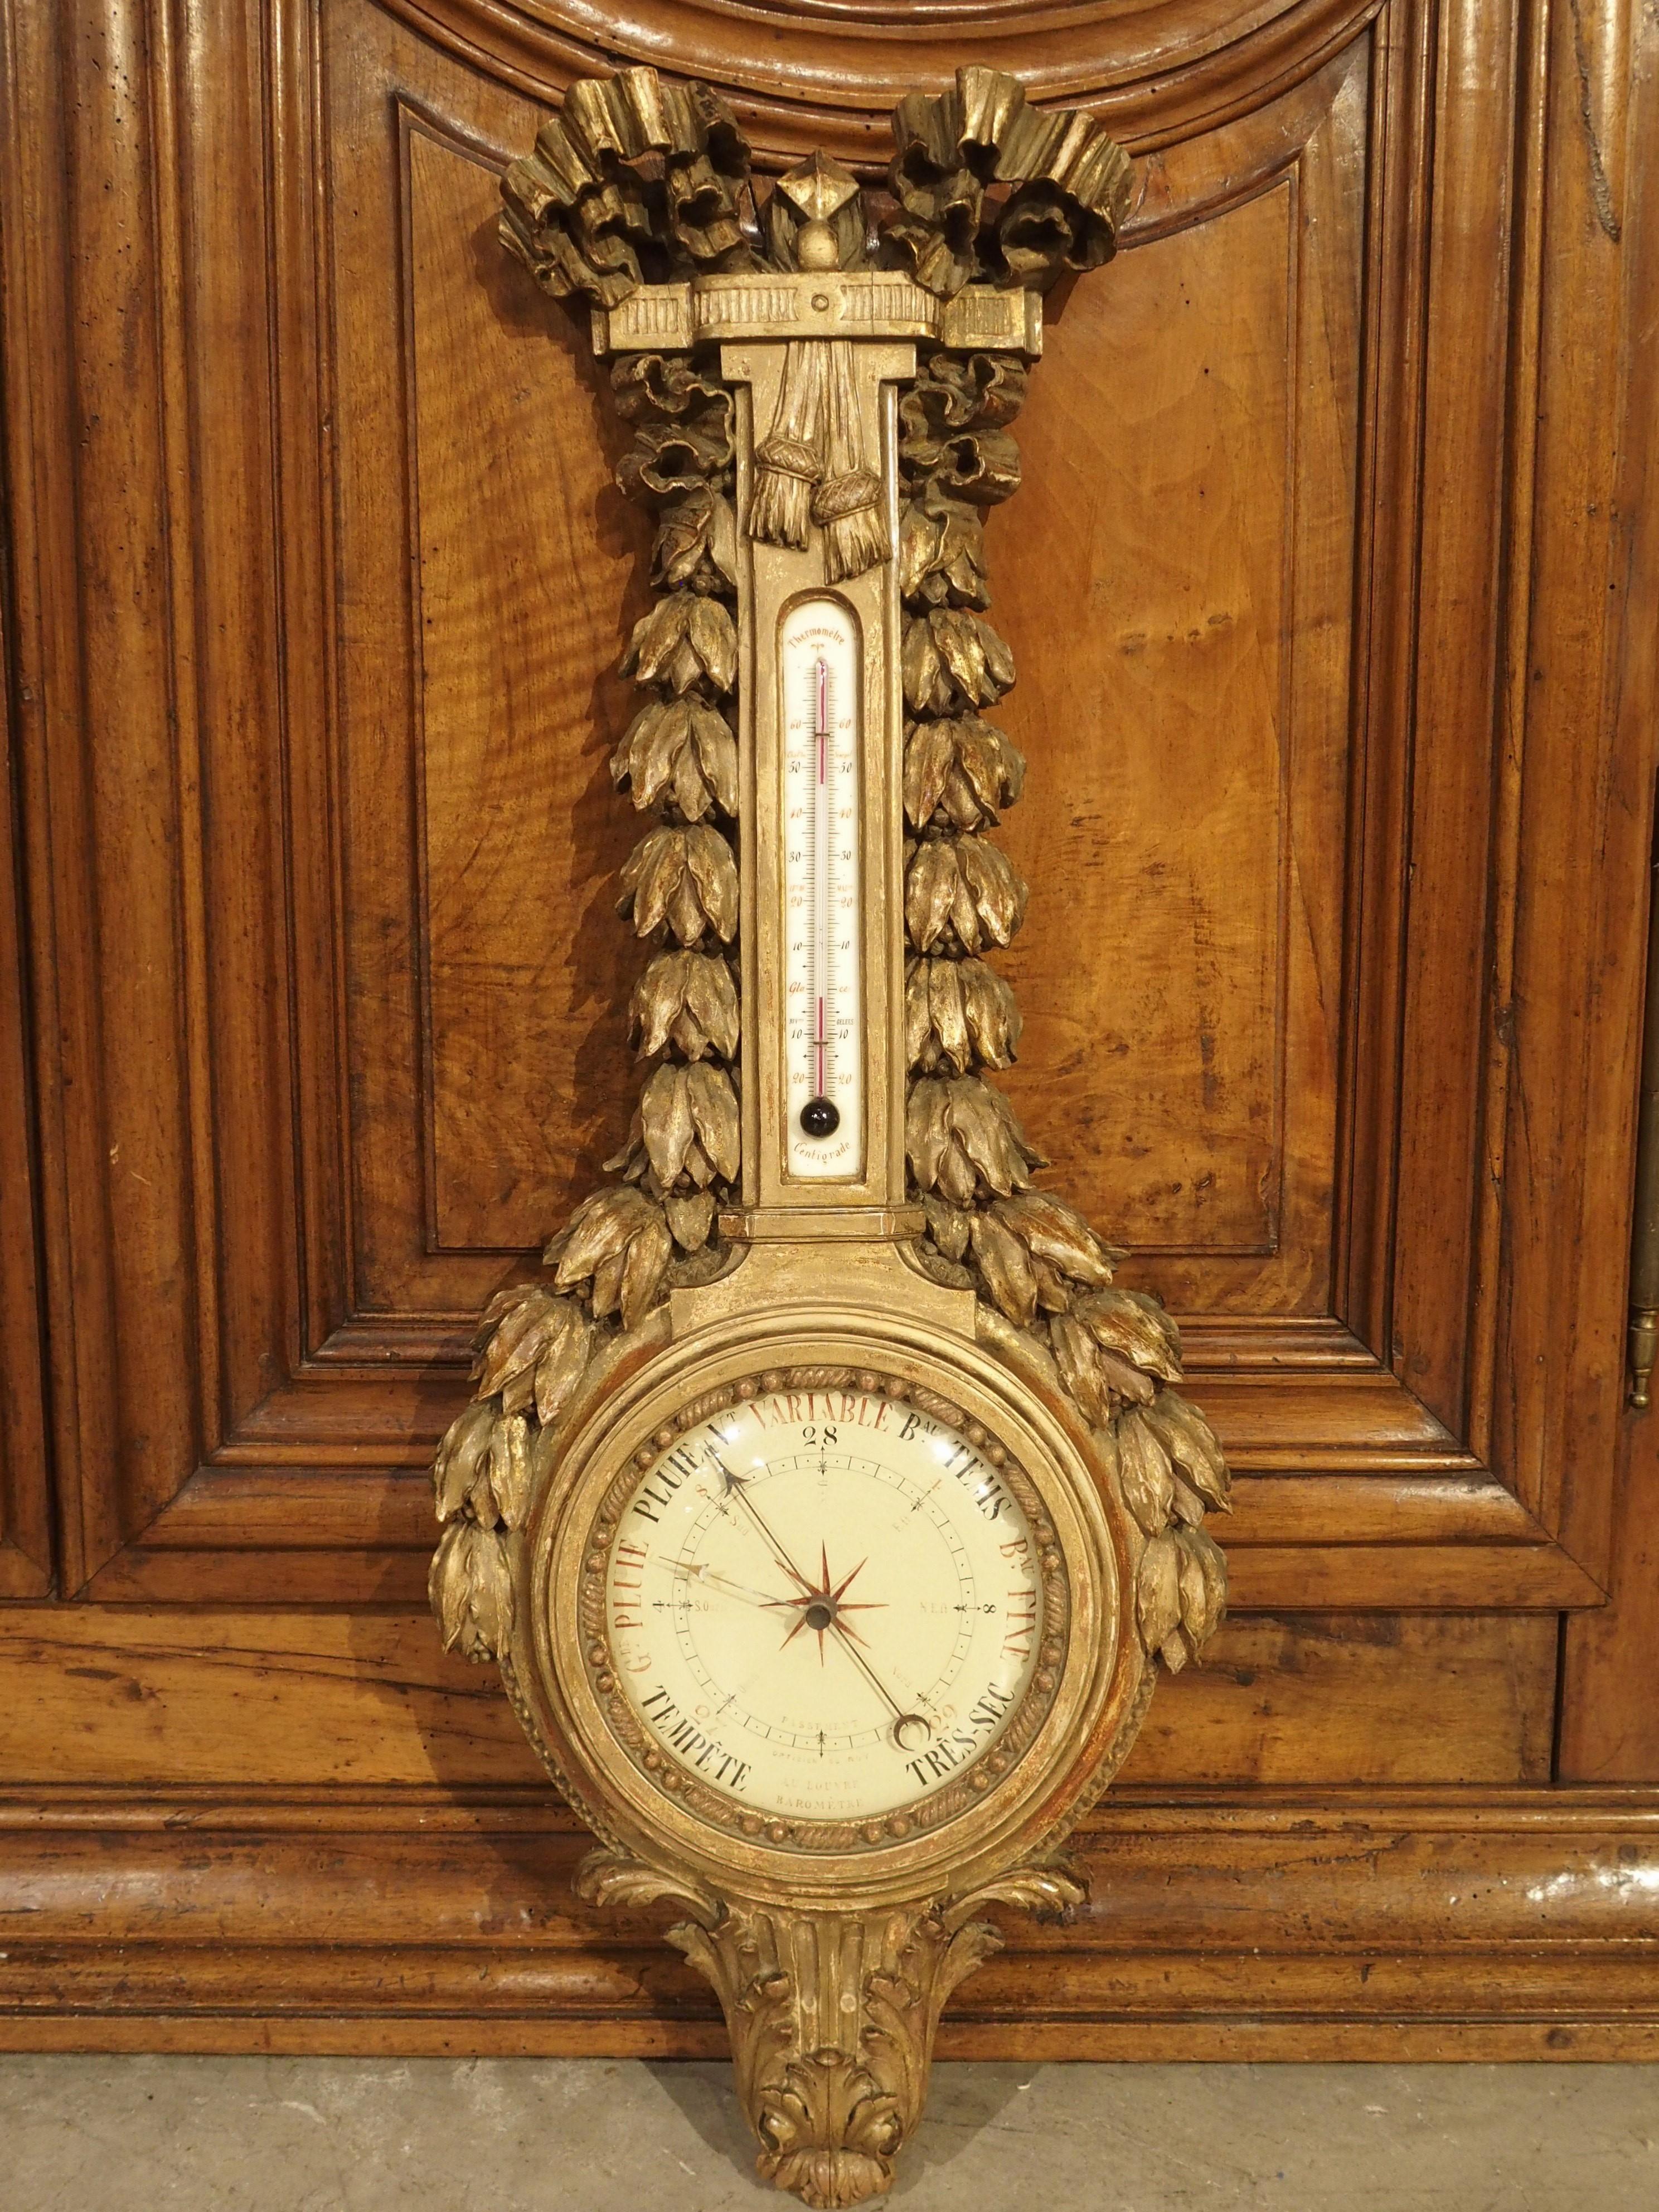 This well-carved French aneroid barometer and thermometer is from the late 1700’s. The gilded scientific instrument is a beautiful example of a period Louis XVI piece.

The top of the apparatus is adorned with a large crinkled ribbon. A repeating